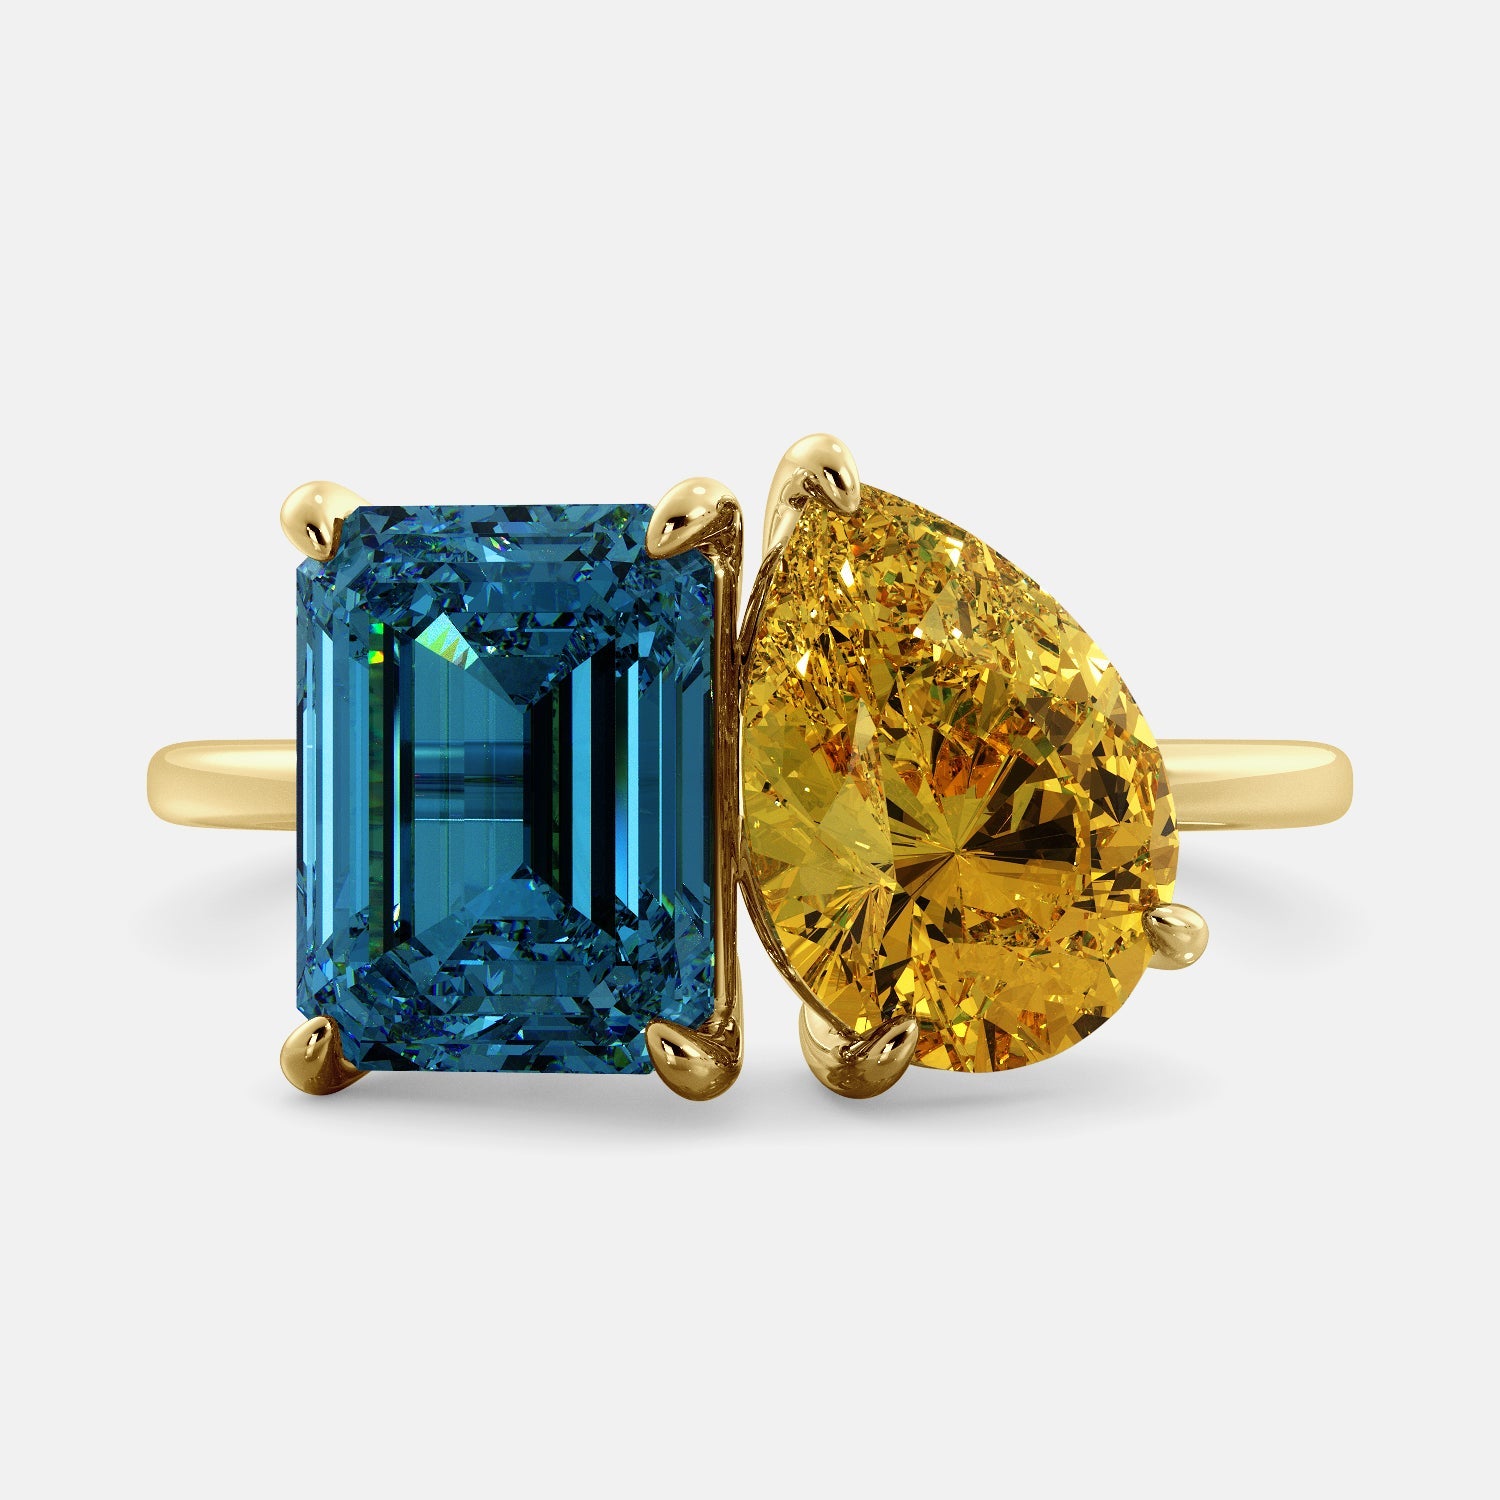 A toi et moi ring with two gemstones, a London blue topaz in an emerald cut shape and a citrine pear shape gem. The ring is made of 14k yellow gold and is set on a dainty band. The gemstones are sparkling in the light and are a beautiful and meaningful piece of jewelry.